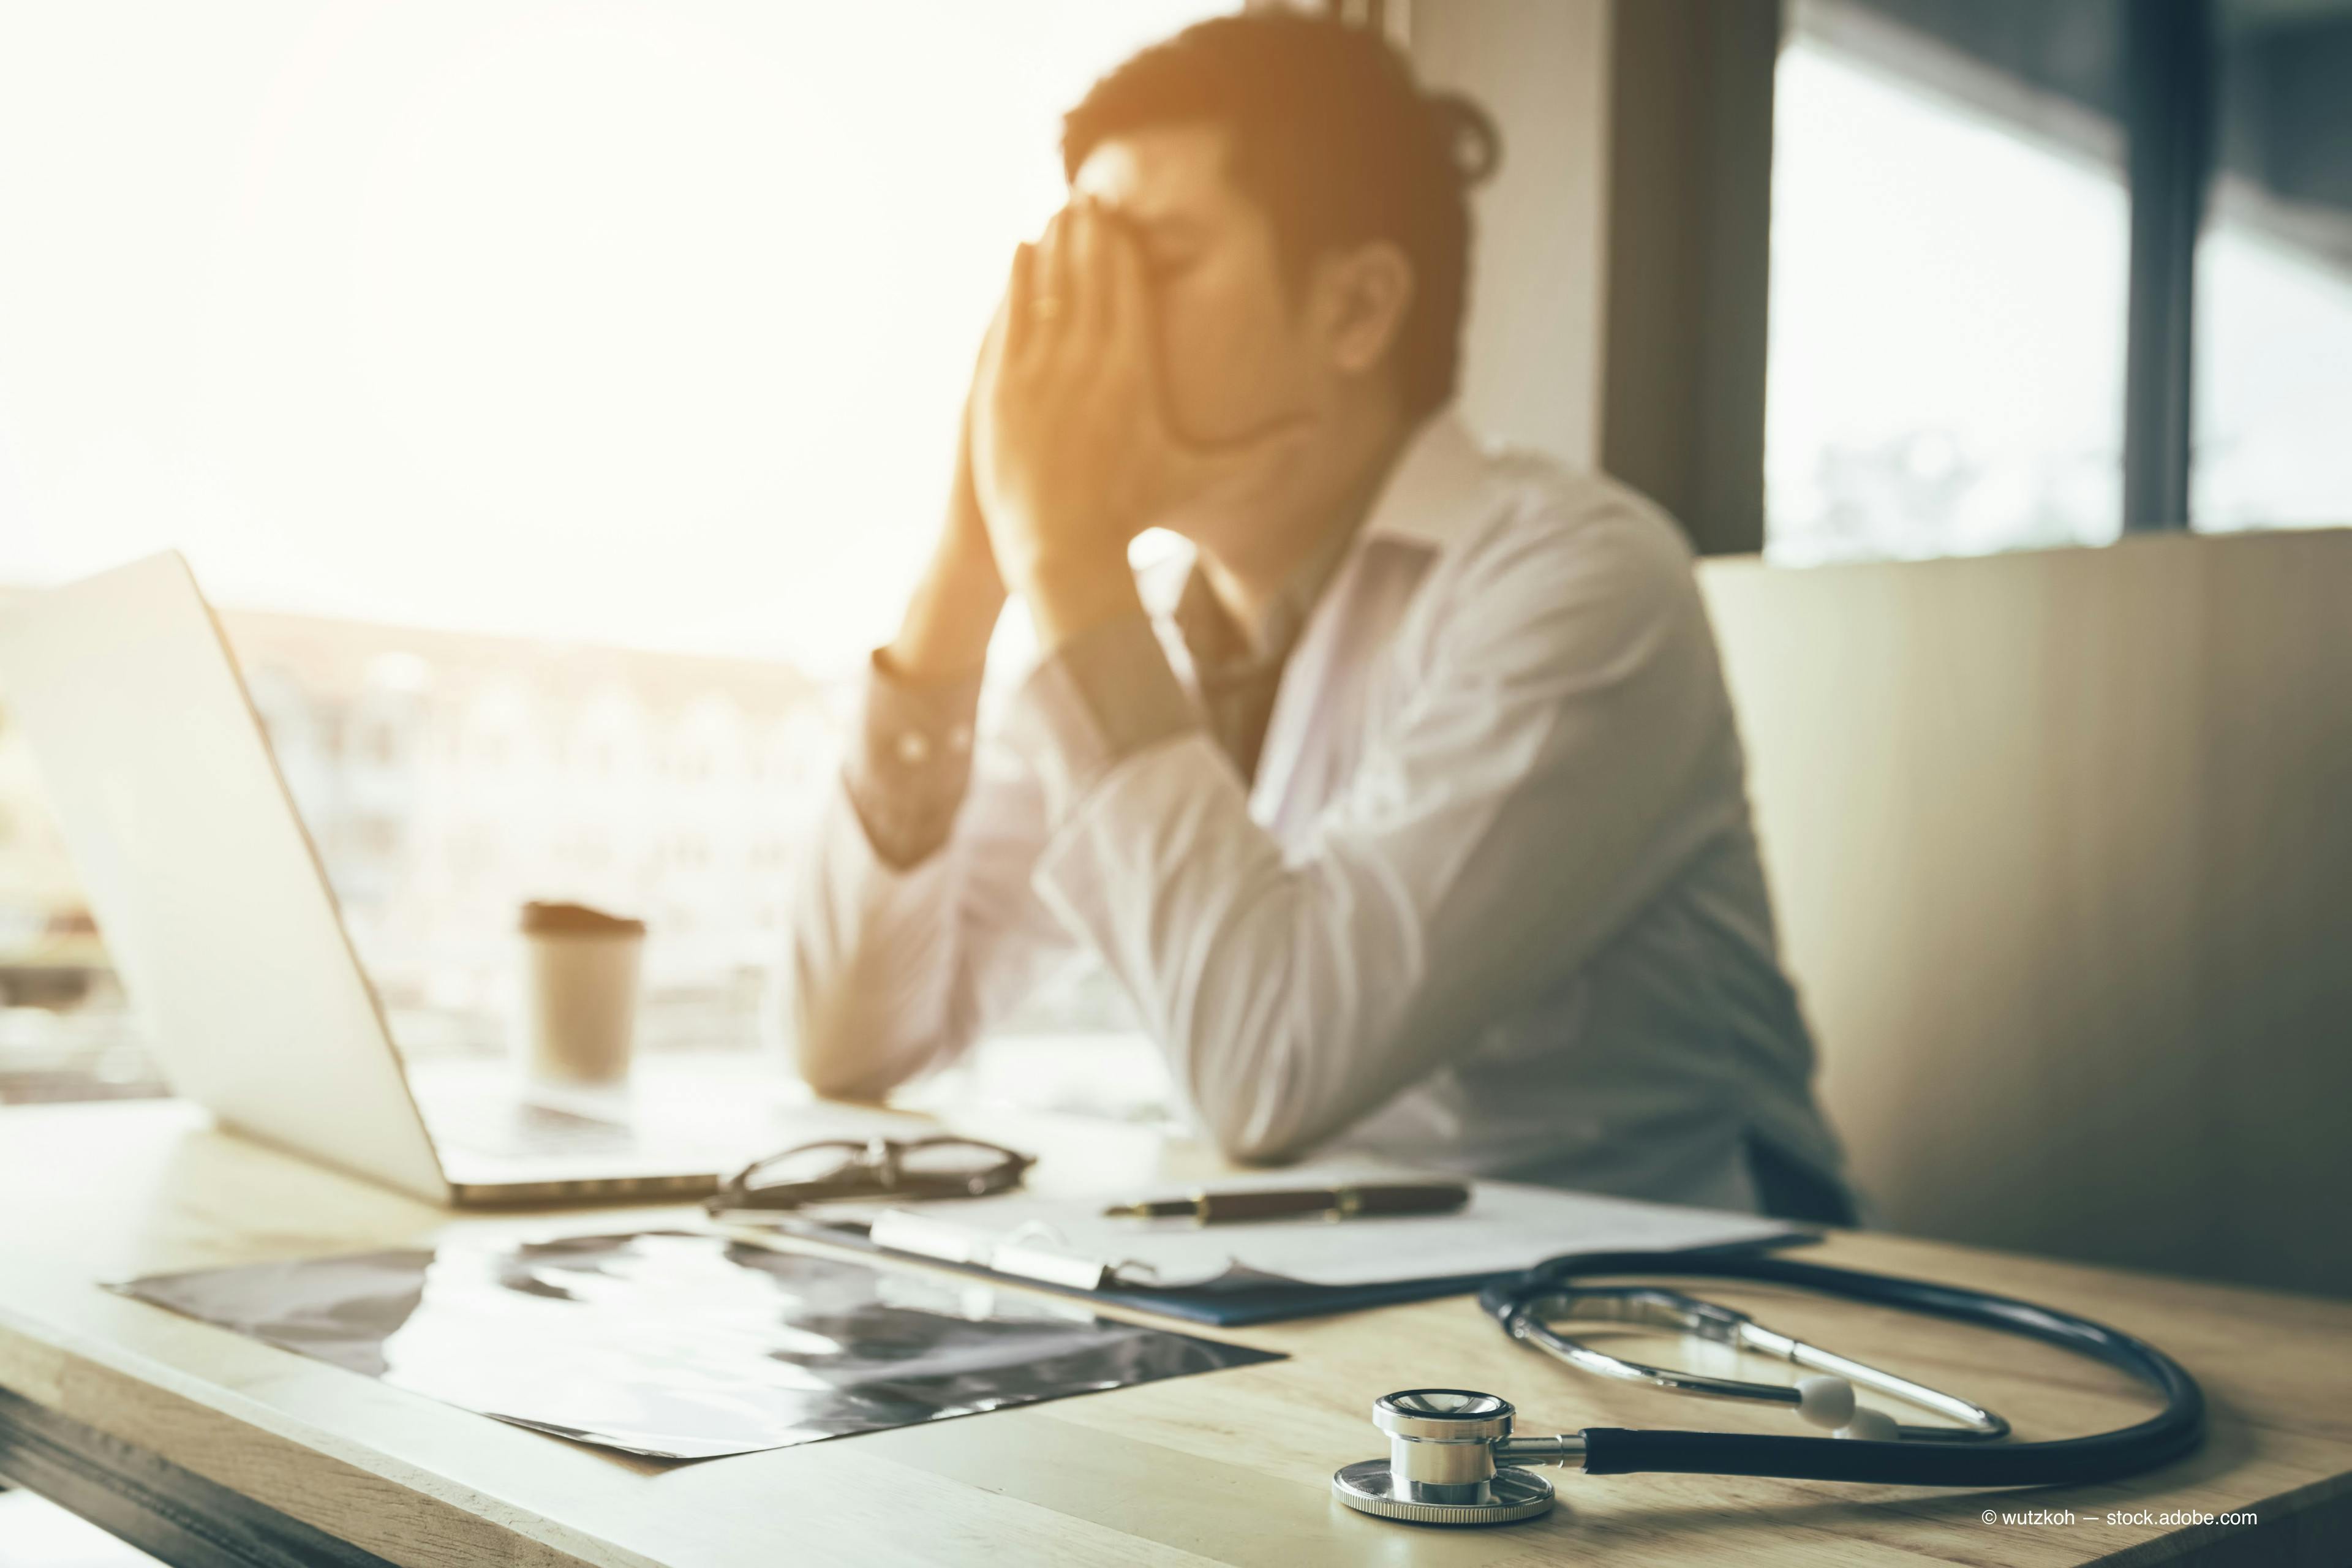 Blog: How to avoid professional burnout as an OD